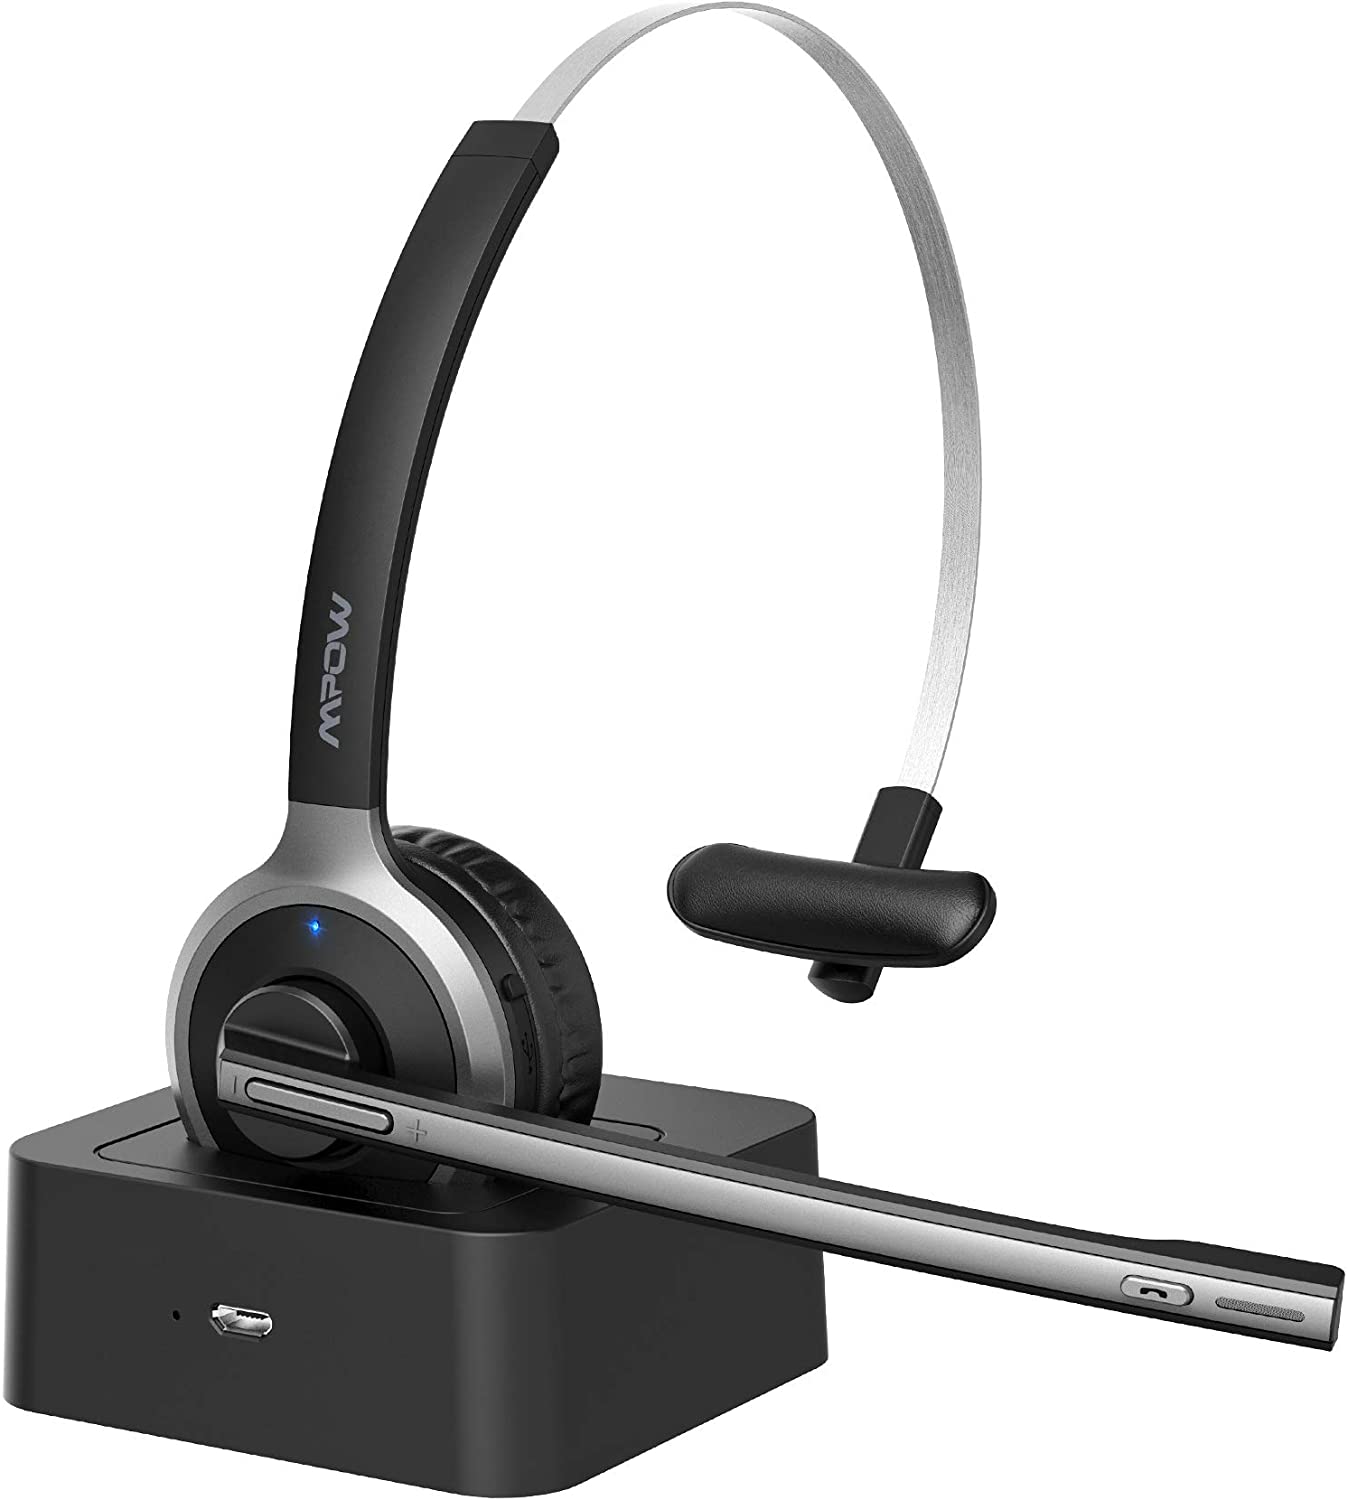 Review of Mpow M5 Pro Bluetooth Headset with Microphone, Wireless Headphones